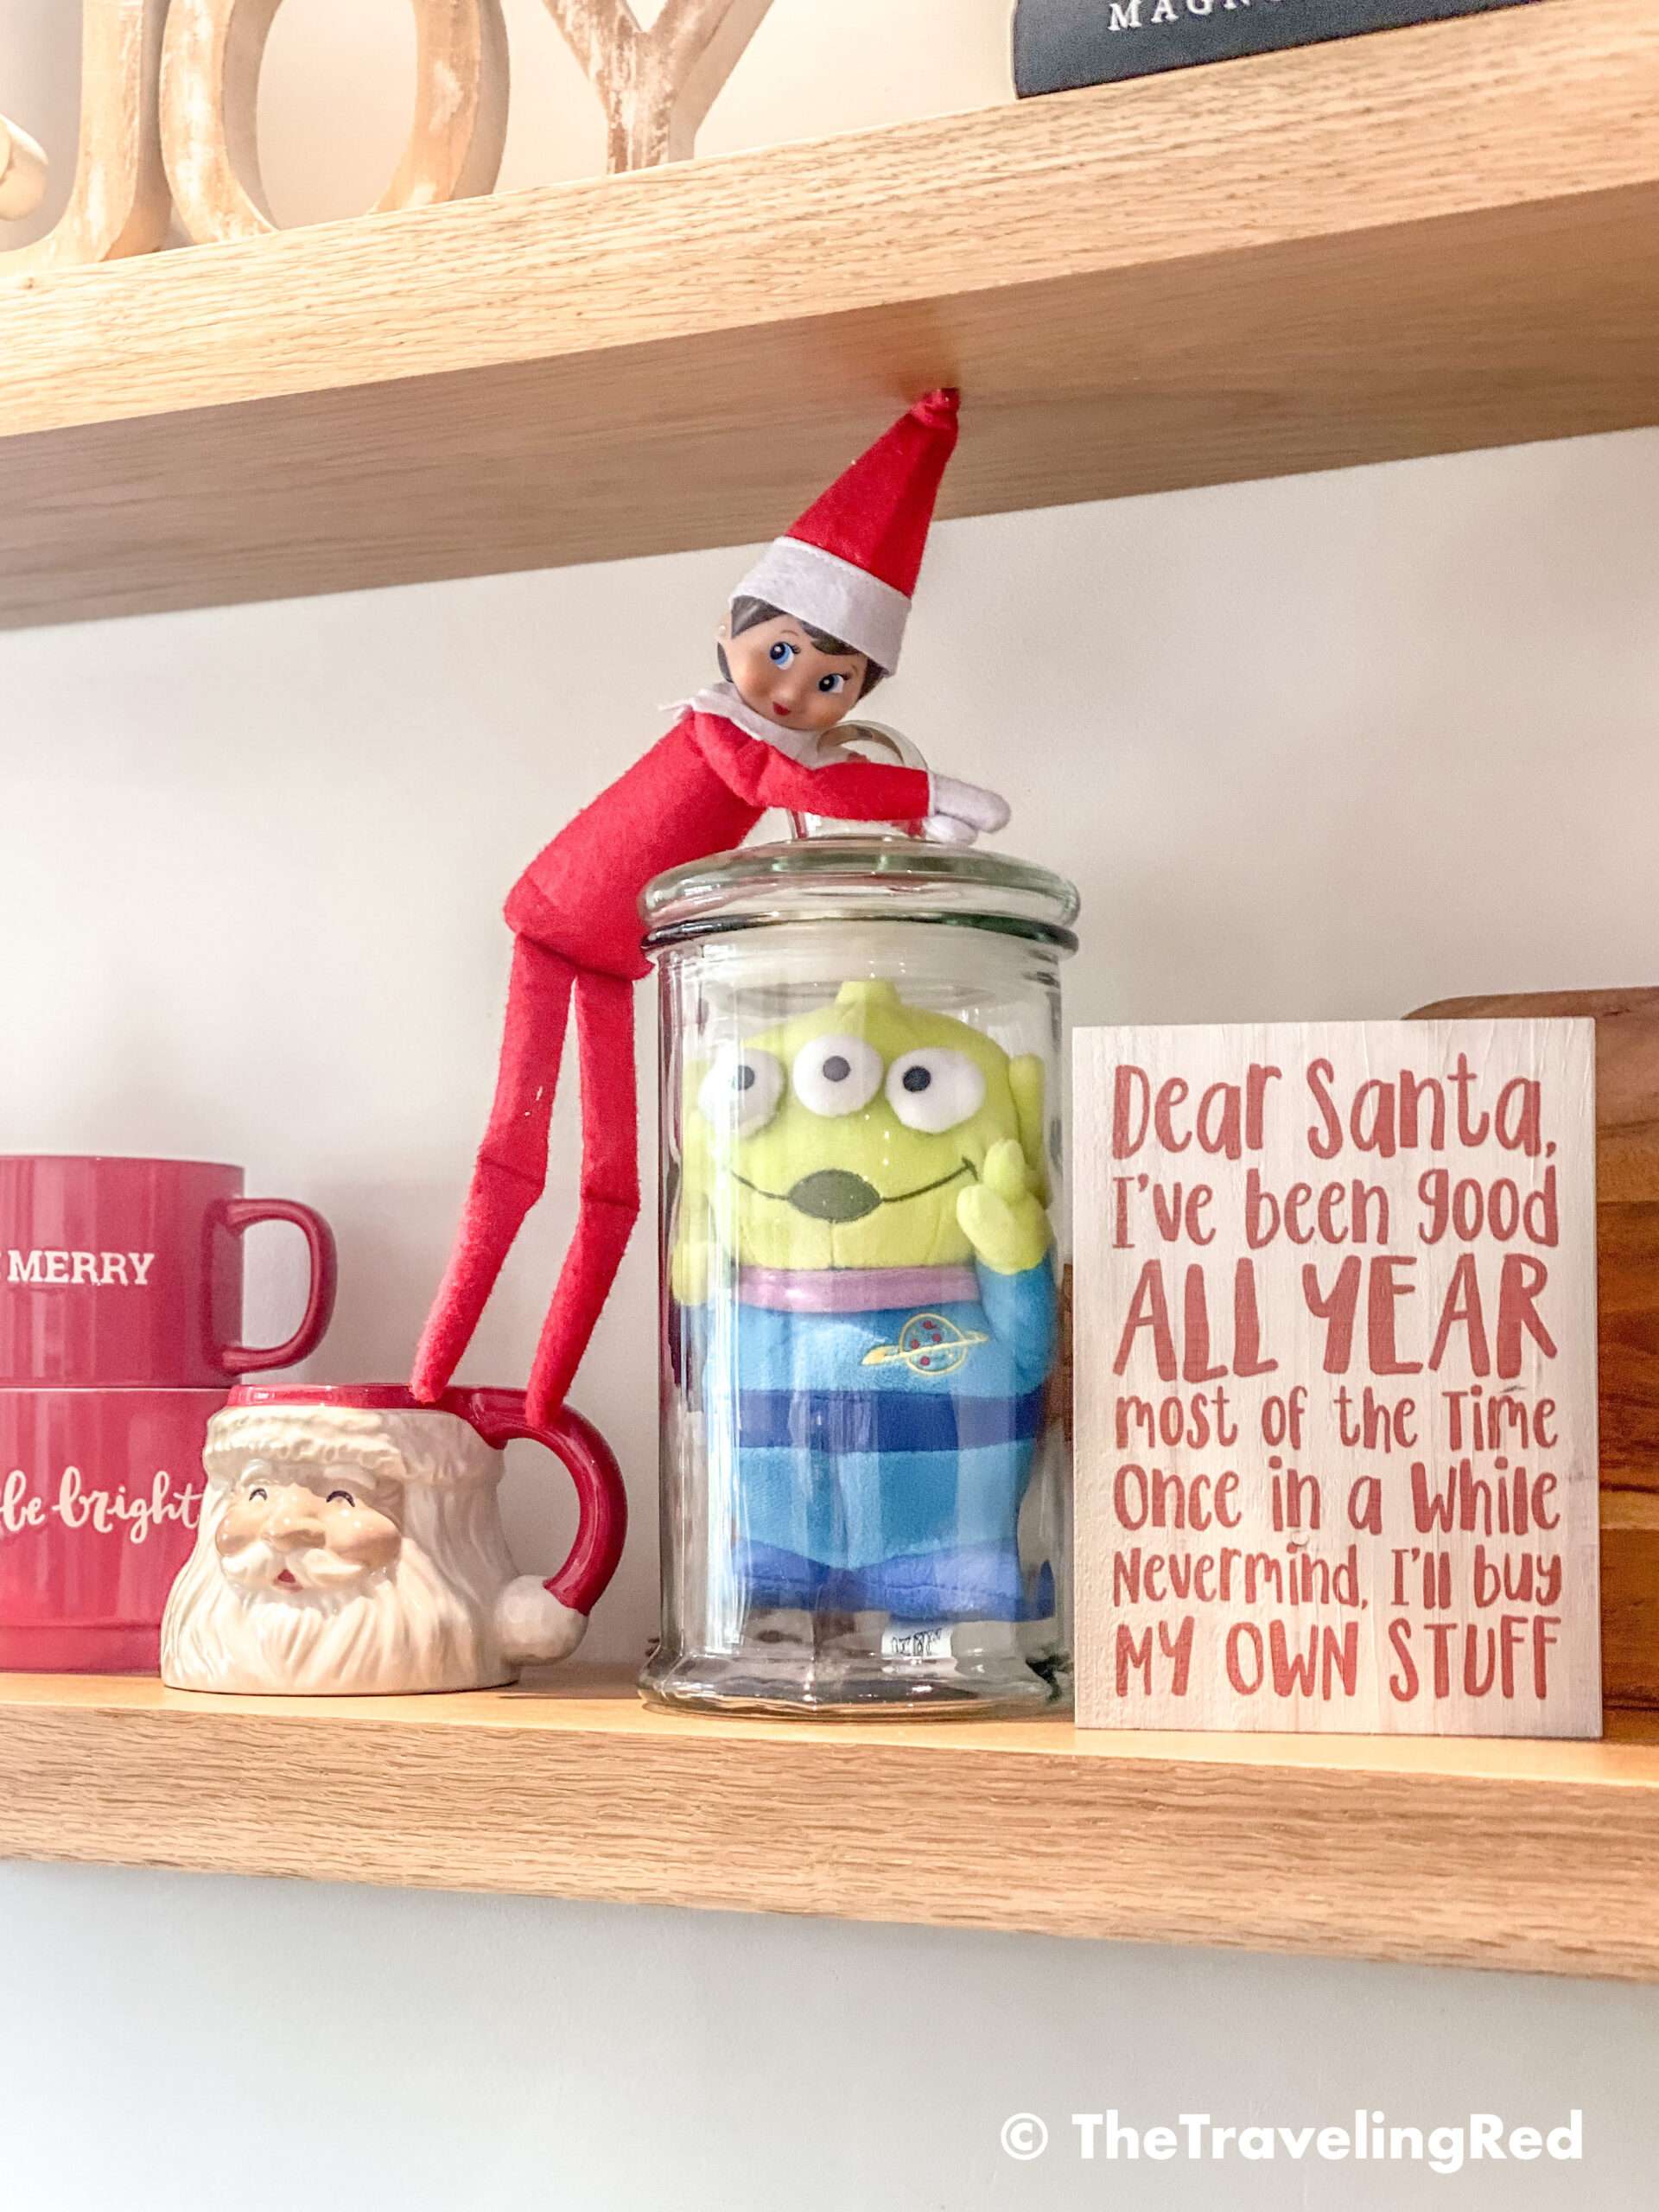 Naughty Elf on the shelf trapped a toy in a glass jar and wouldn't let him out.  Fun and easy elf on the shelf ideas for a naughty elf that are quick and easy using things you have at home.